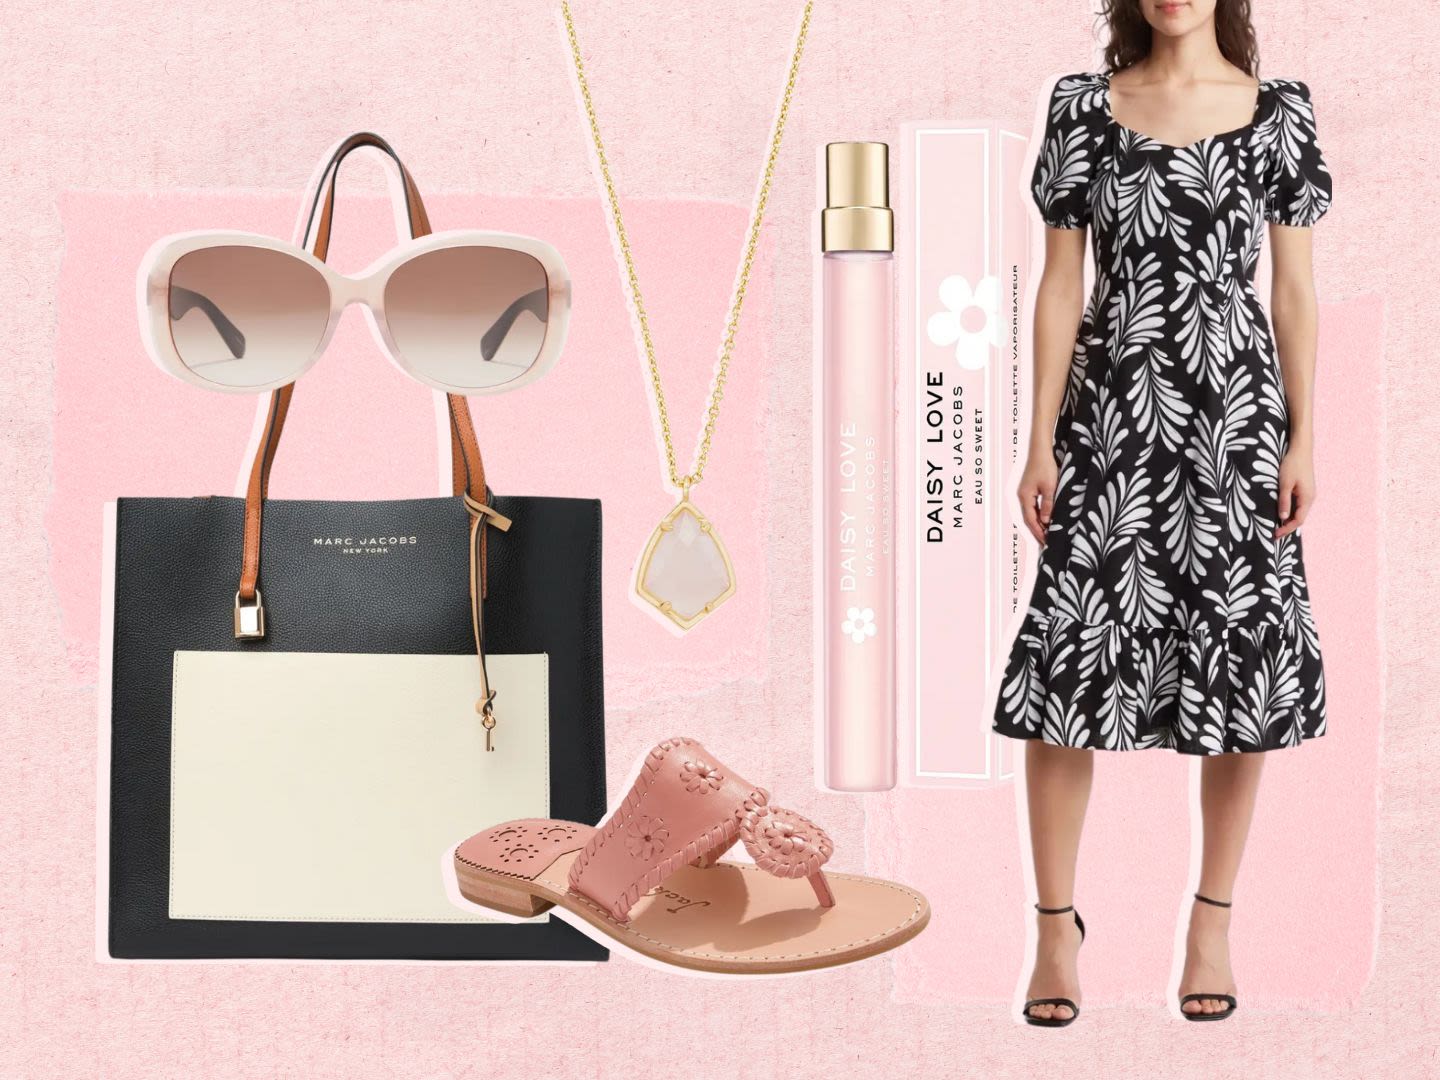 Nordstrom Rack Discounted Tons of New Last-Minute Mother’s Day Gifts with Hoka, Marc Jacobs & More Up to 85% Off